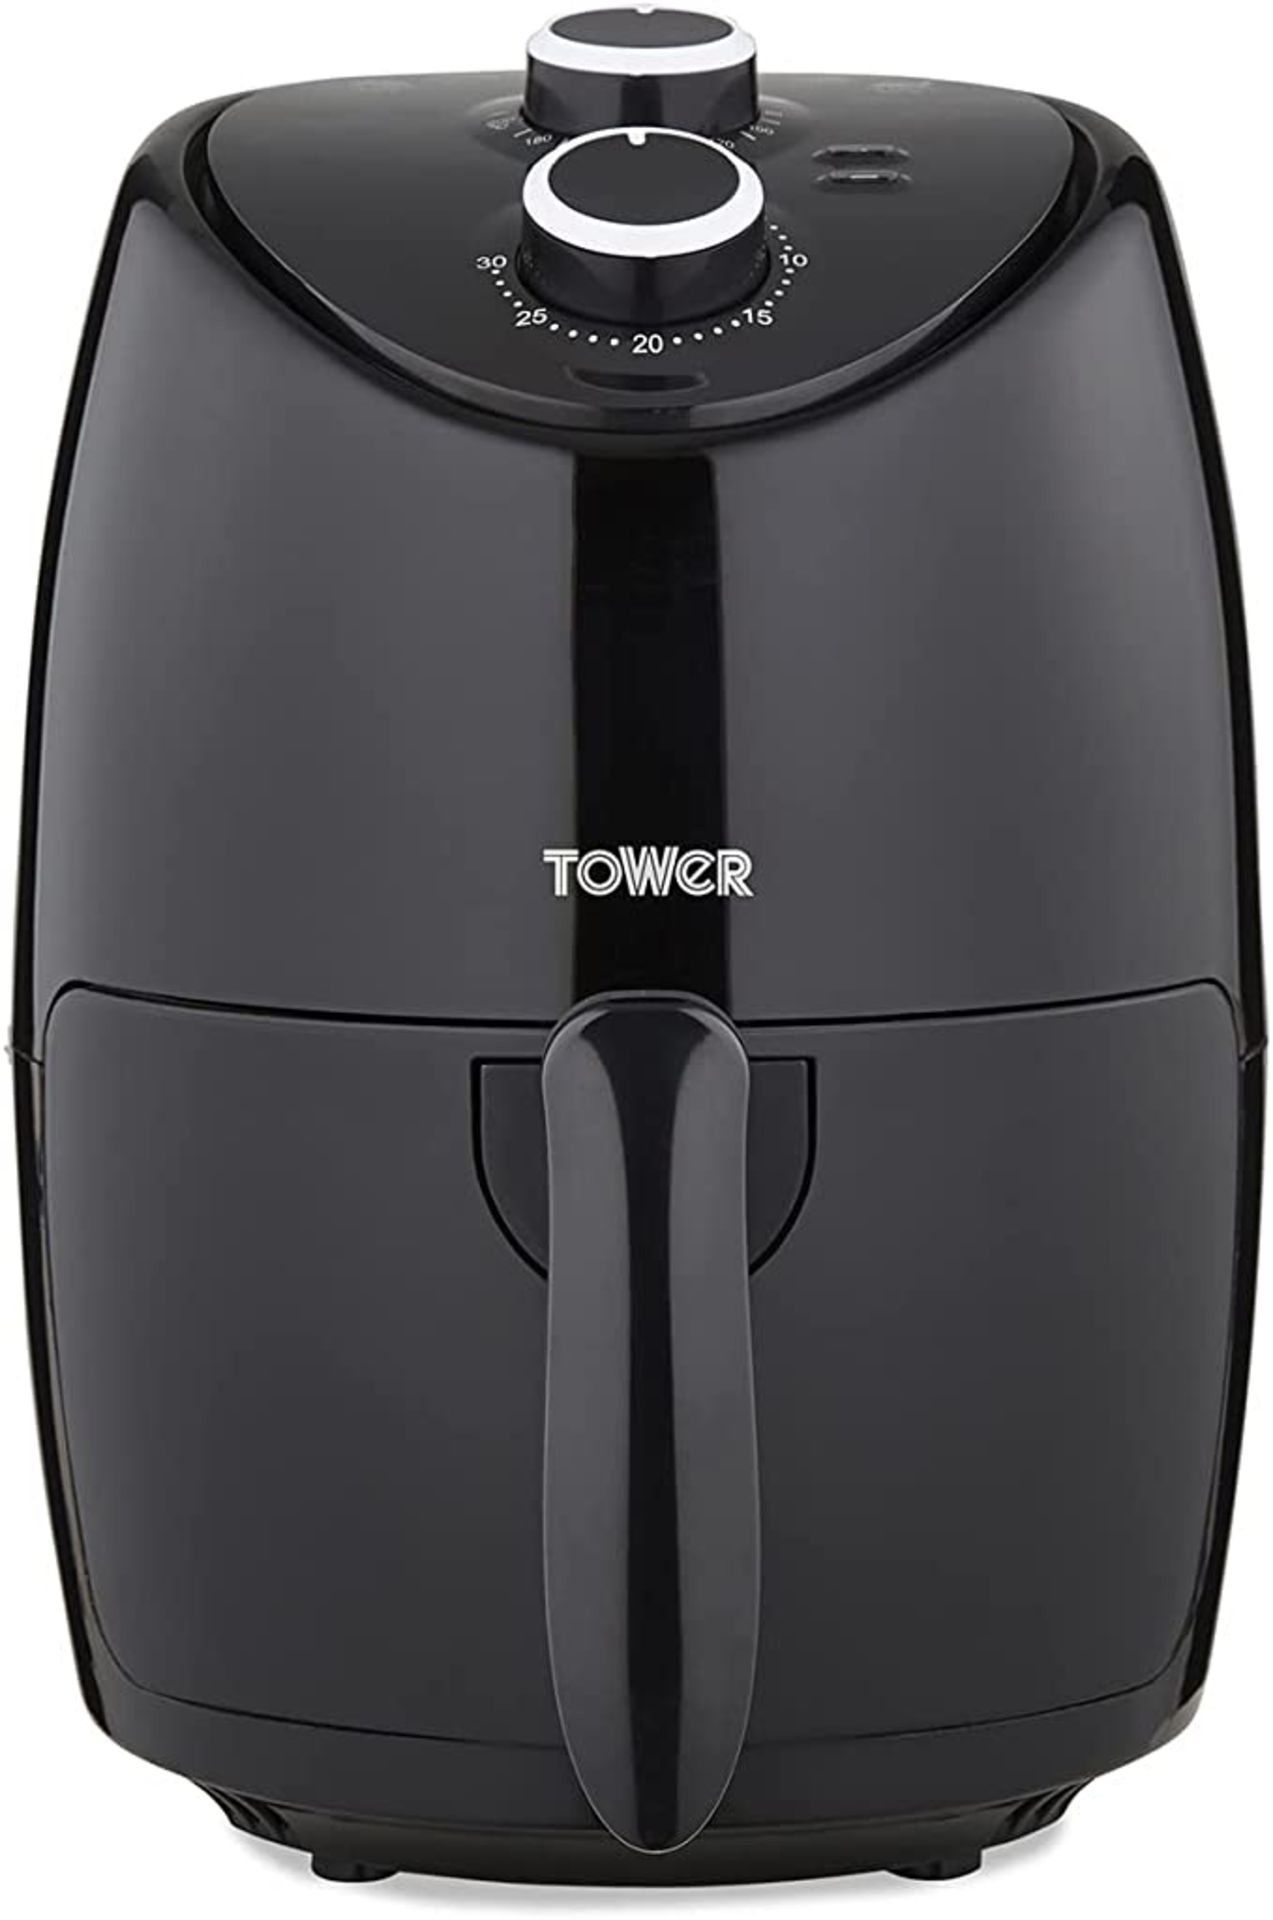 Tower T17087 Vortx Compact Air Fryer with Rapid Air Circulation, 30-Minute Timer, 2L, 1000W, Black -